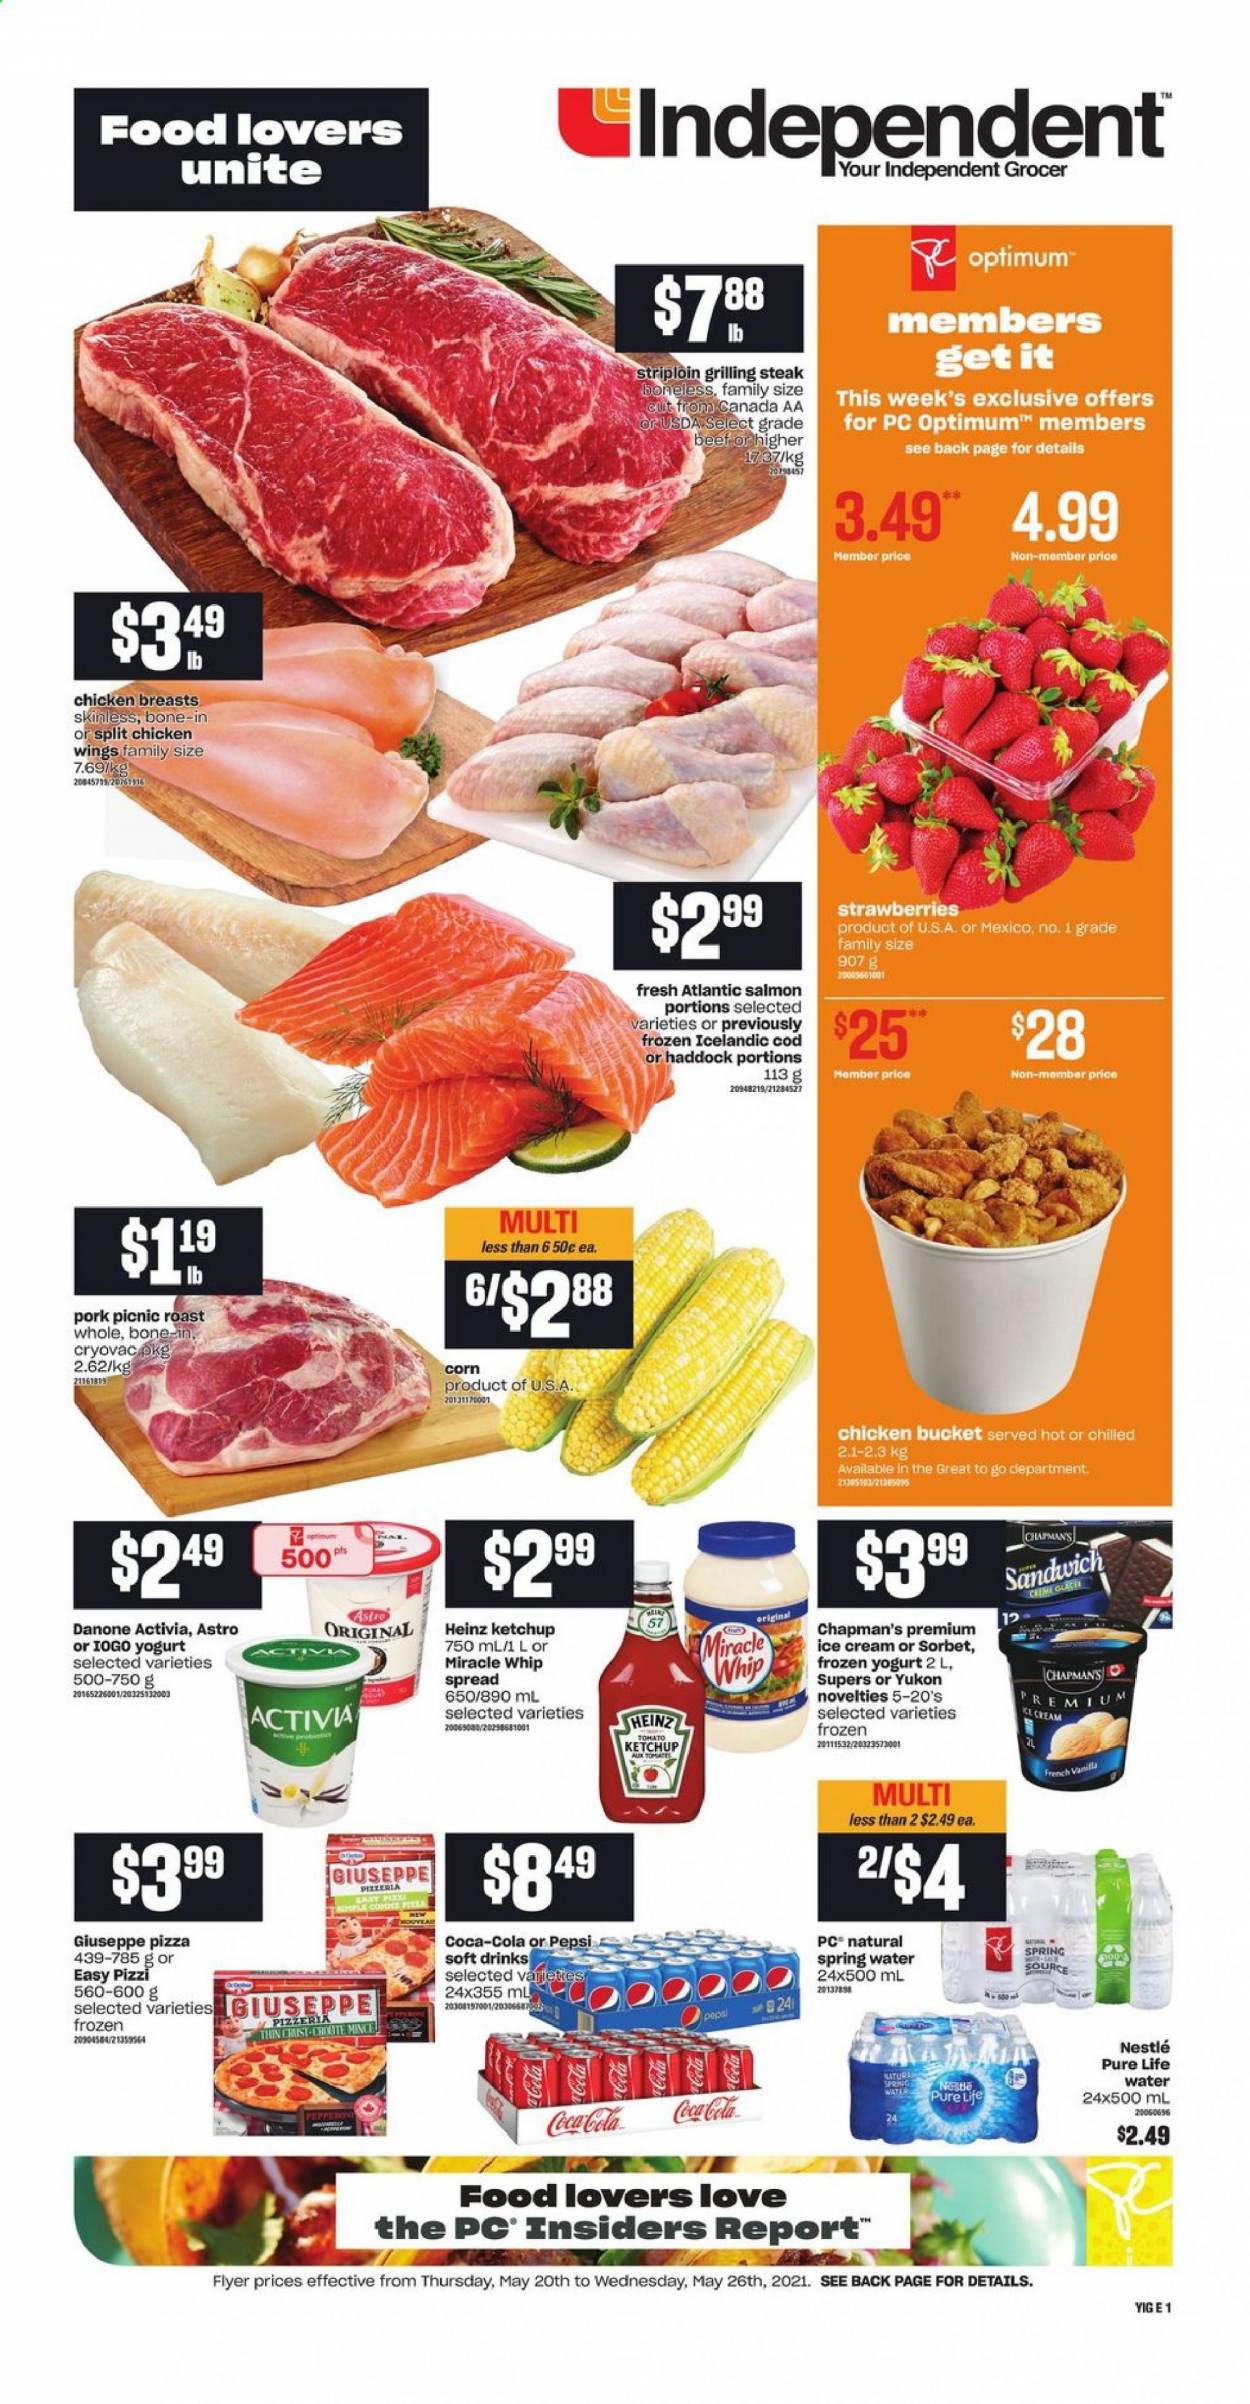 thumbnail - Independent Flyer - May 20, 2021 - May 26, 2021 - Sales products - corn, strawberries, cod, salmon, haddock, pizza, sandwich, yoghurt, Activia, Miracle Whip, ice cream, chicken wings, Heinz, Coca-Cola, Pepsi, soft drink, spring water, Pure Life Water, chicken breasts, Optimum, Danone, Nestlé, steak. Page 1.